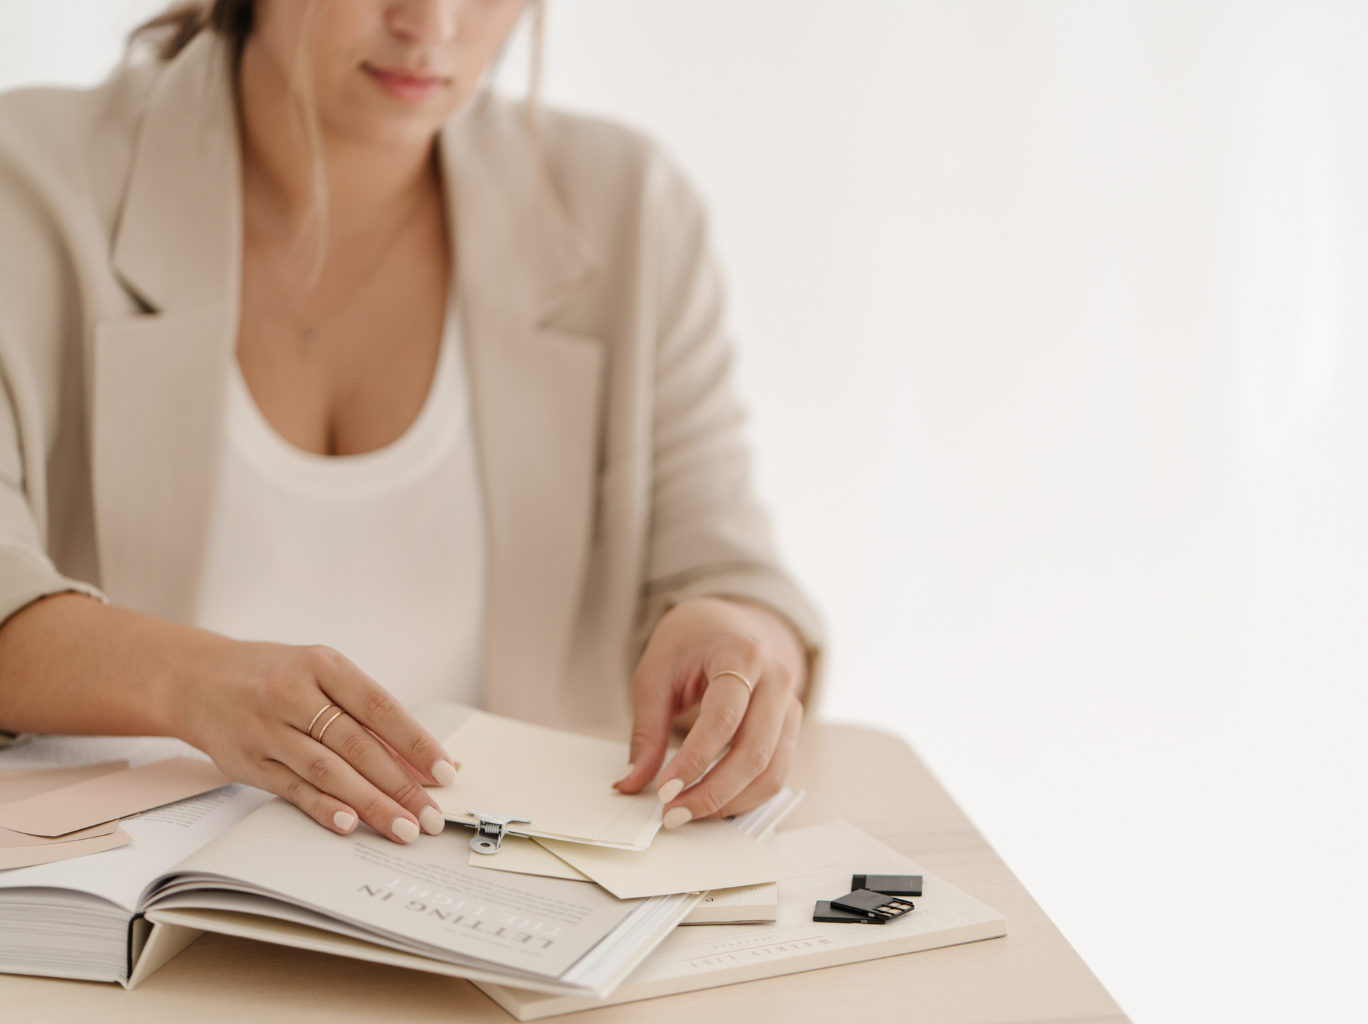 A woman sits at a desk with a planner, an open book, and a collection of notecards spread out in front of her, deliberating the advantages and disadvantages of bootstrapping versus seeking funding for a business venture.